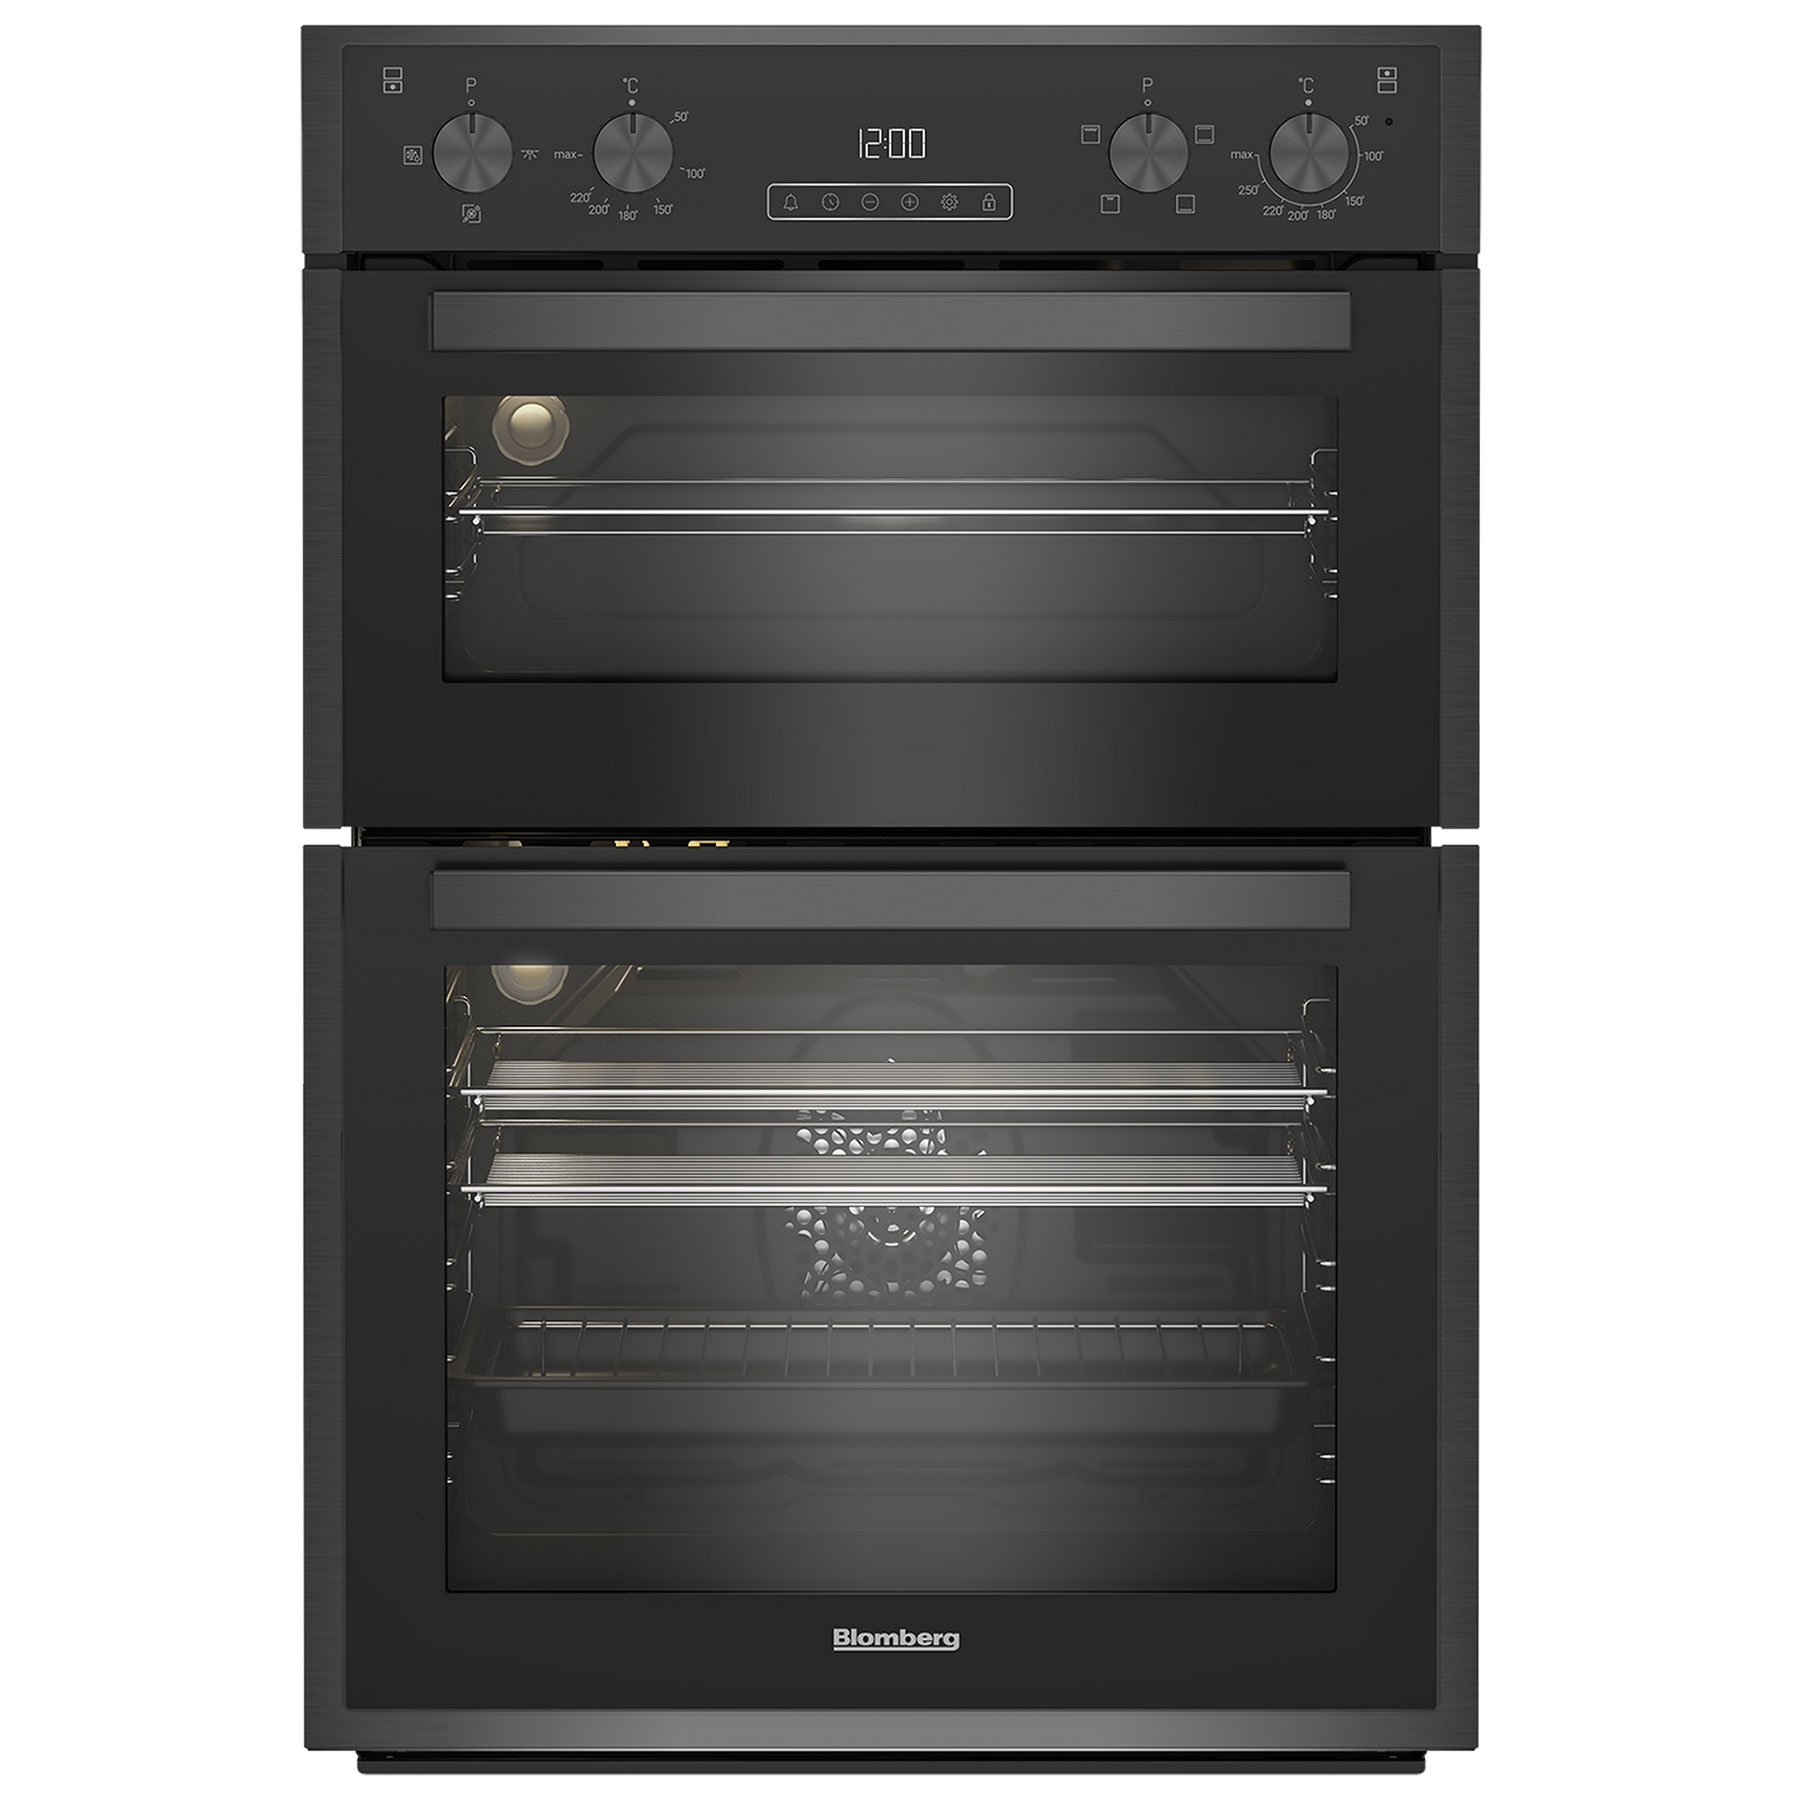 Image of Blomberg RODN9202DX Built In Electric Double Oven in Dark Steel